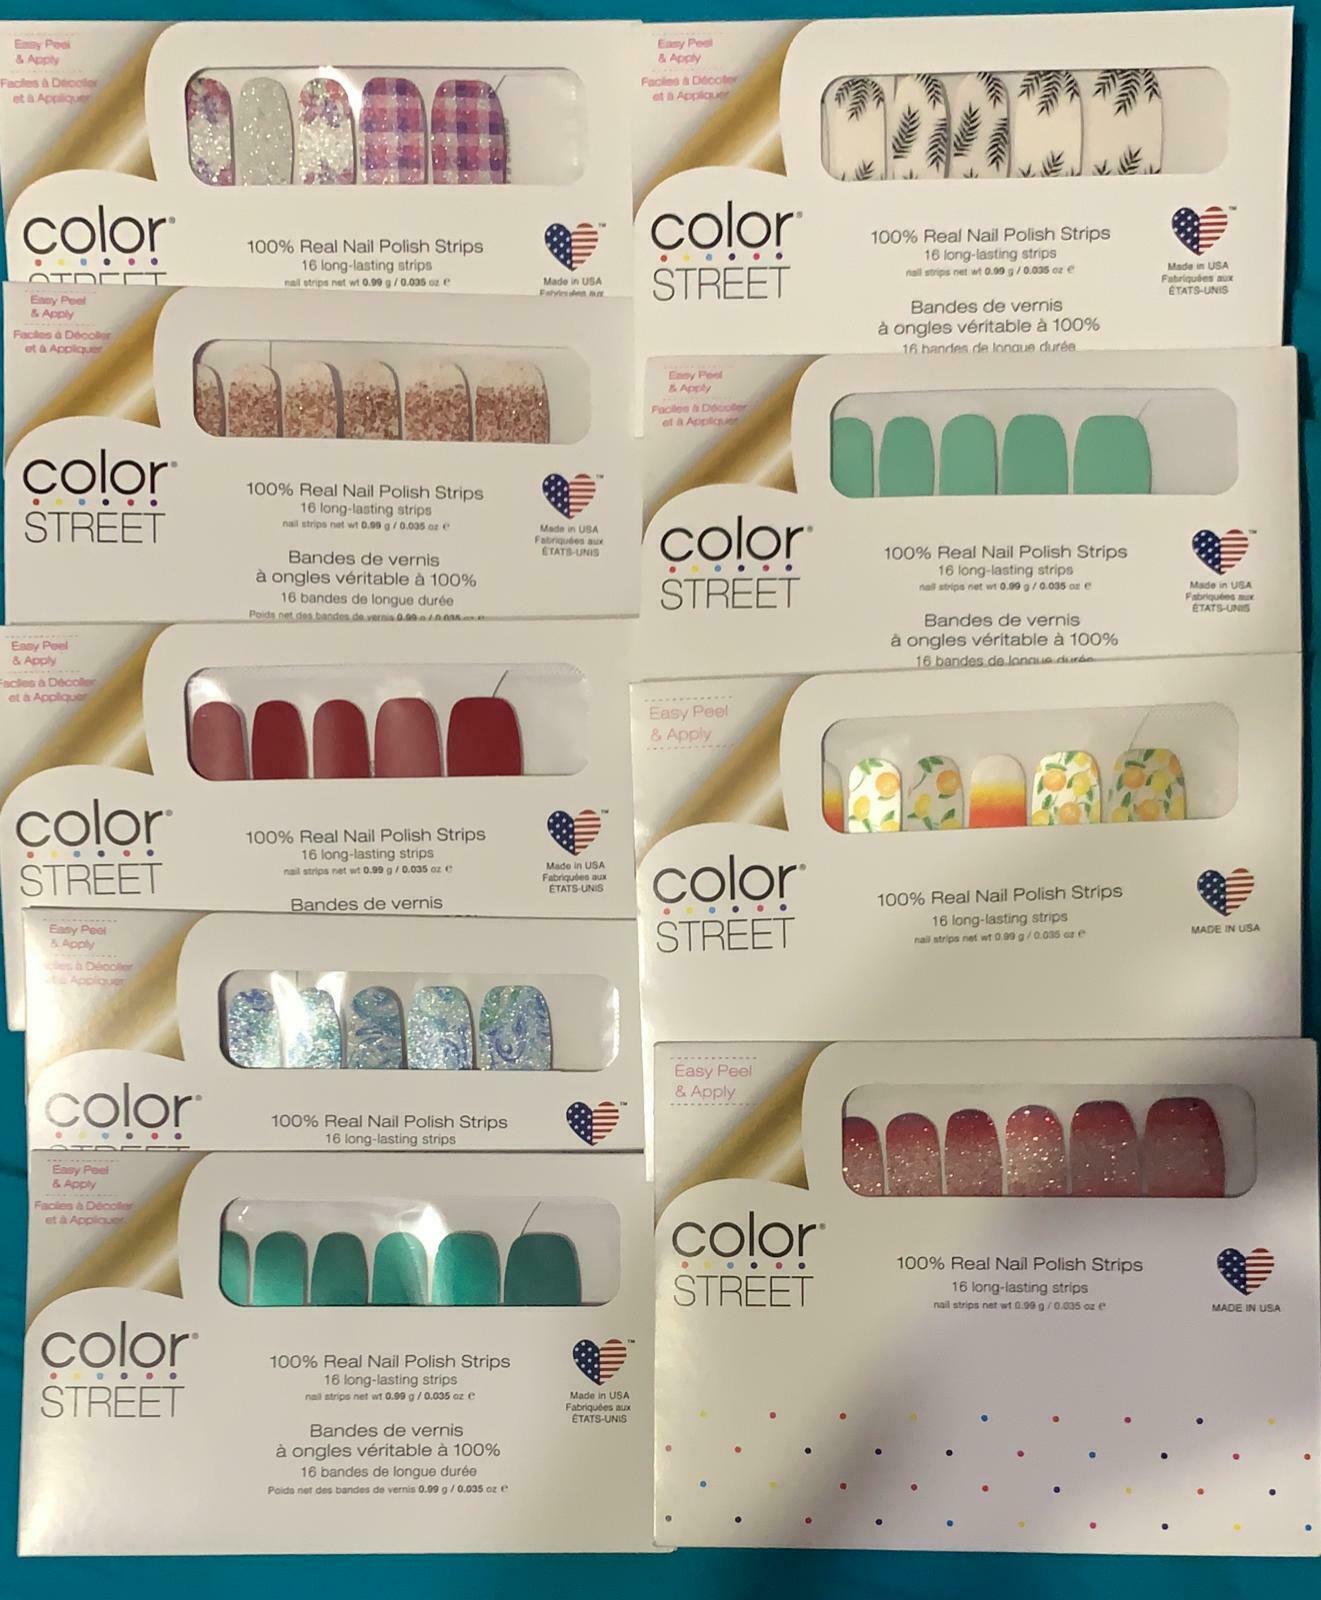 COLOR STREET 100% NAIL POLISH STRIPS VARIETY BEST COLORS SOLIDS GLITTER RETIRED